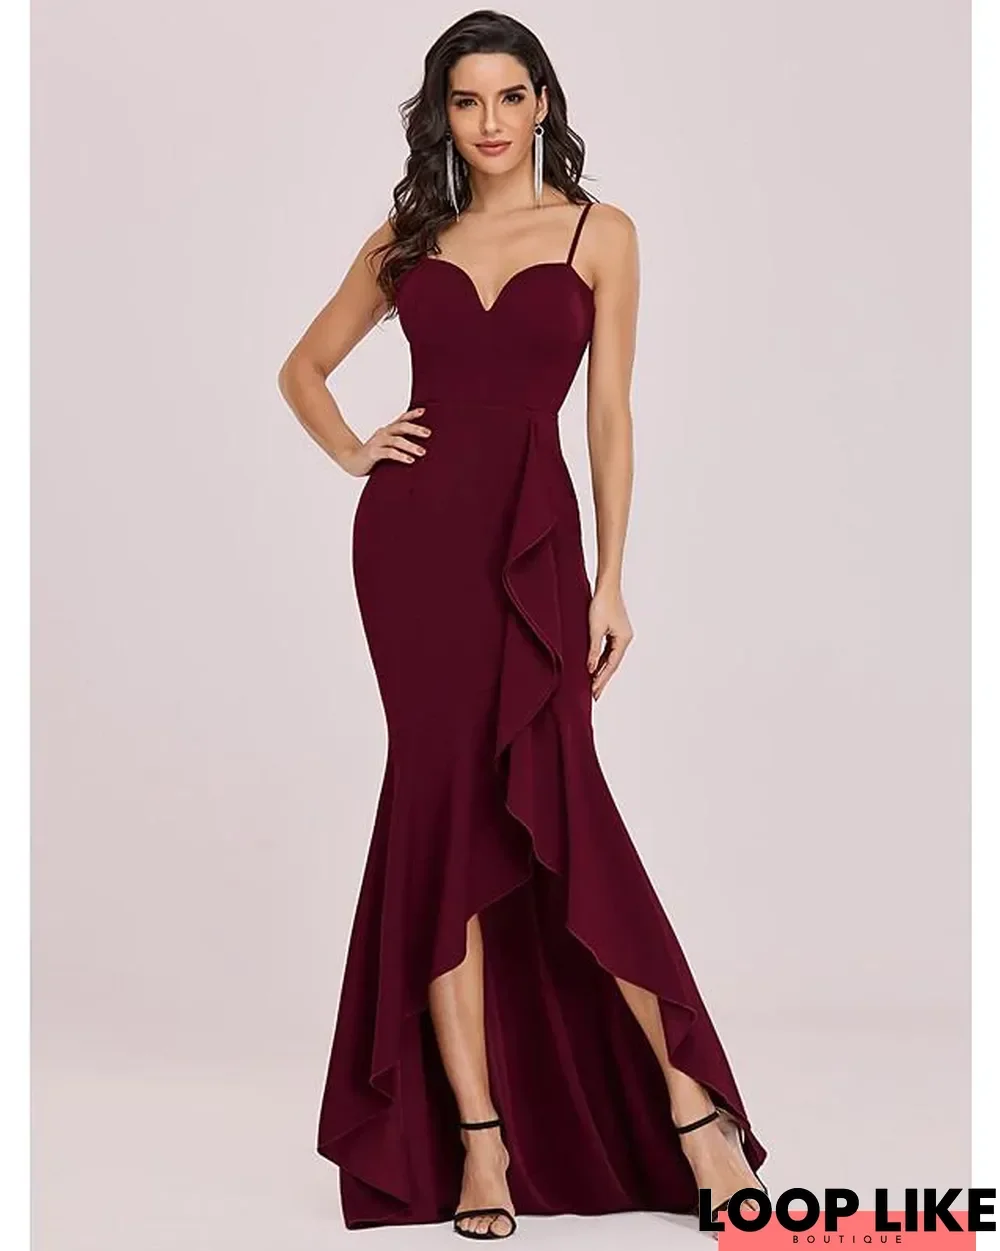 Women's Trumpet / Mermaid Dress Maxi Long Dress Sleeveless Solid Color Fall Spring Formal Sexy Red